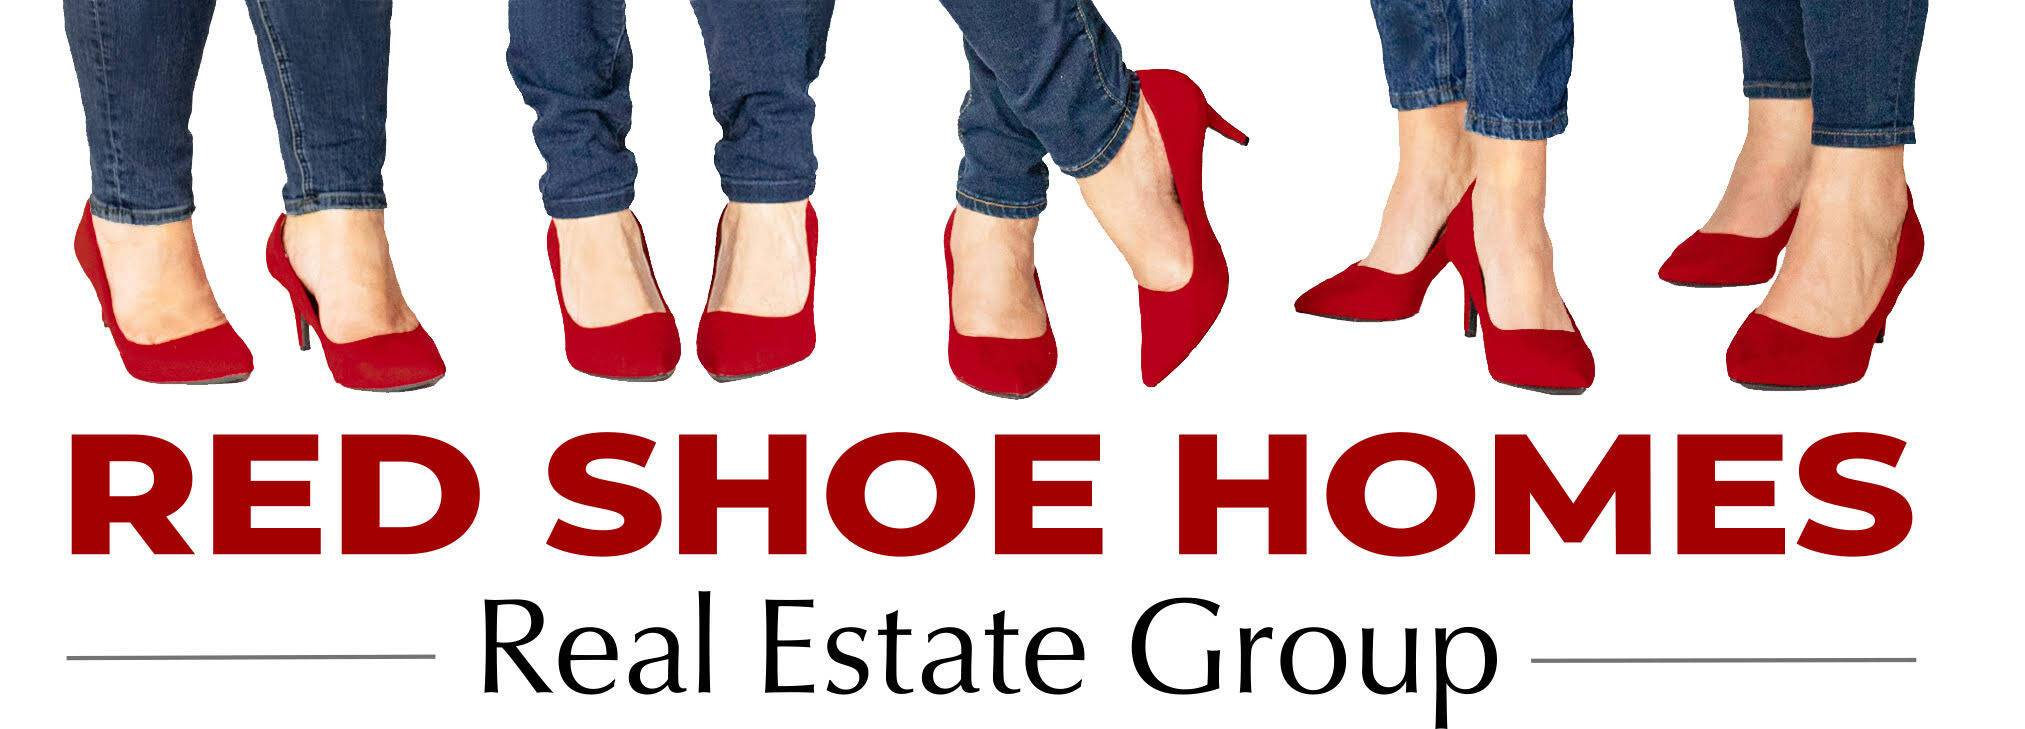 Red Shoe Homes